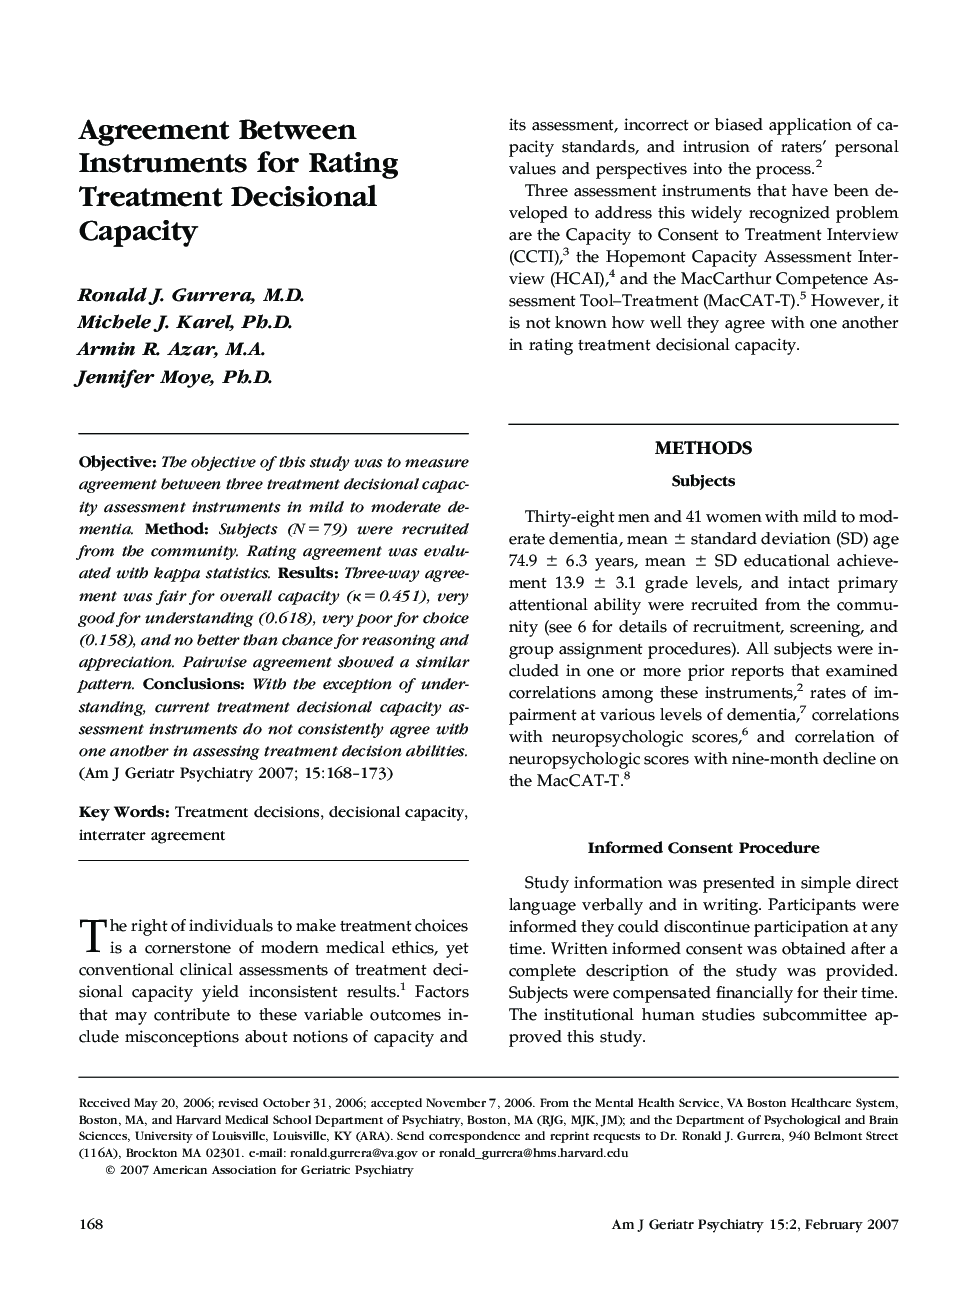 Agreement Between Instruments for Rating Treatment Decisional Capacity